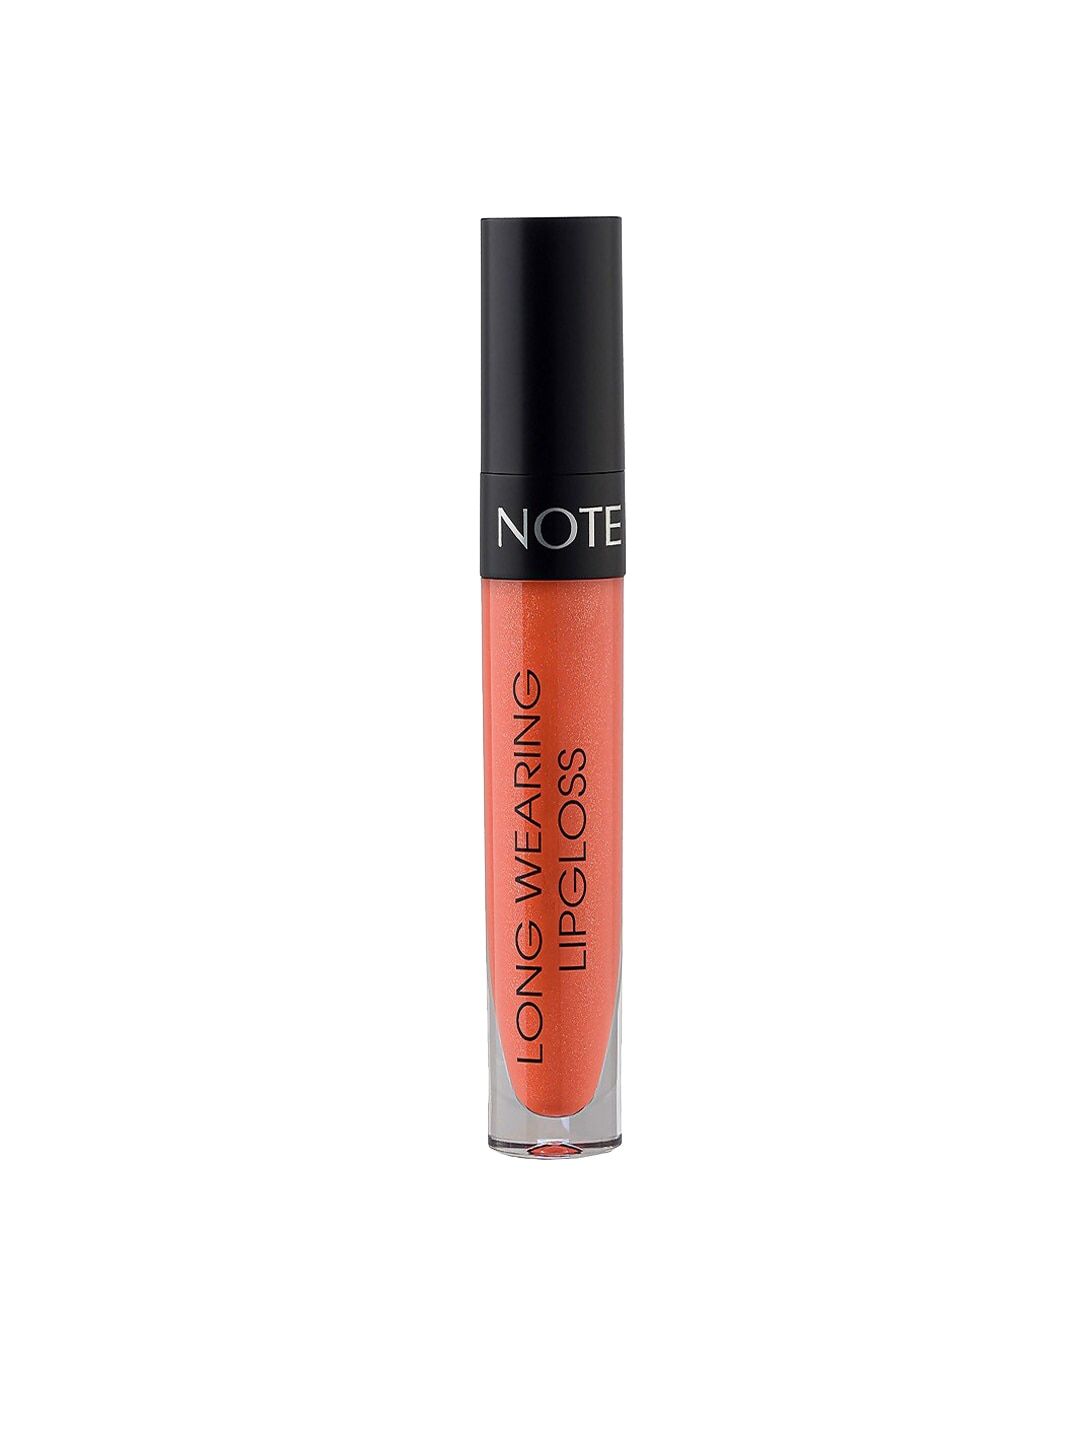 Note Long Wearing Lipgloss 08 Pink 6ml Price in India